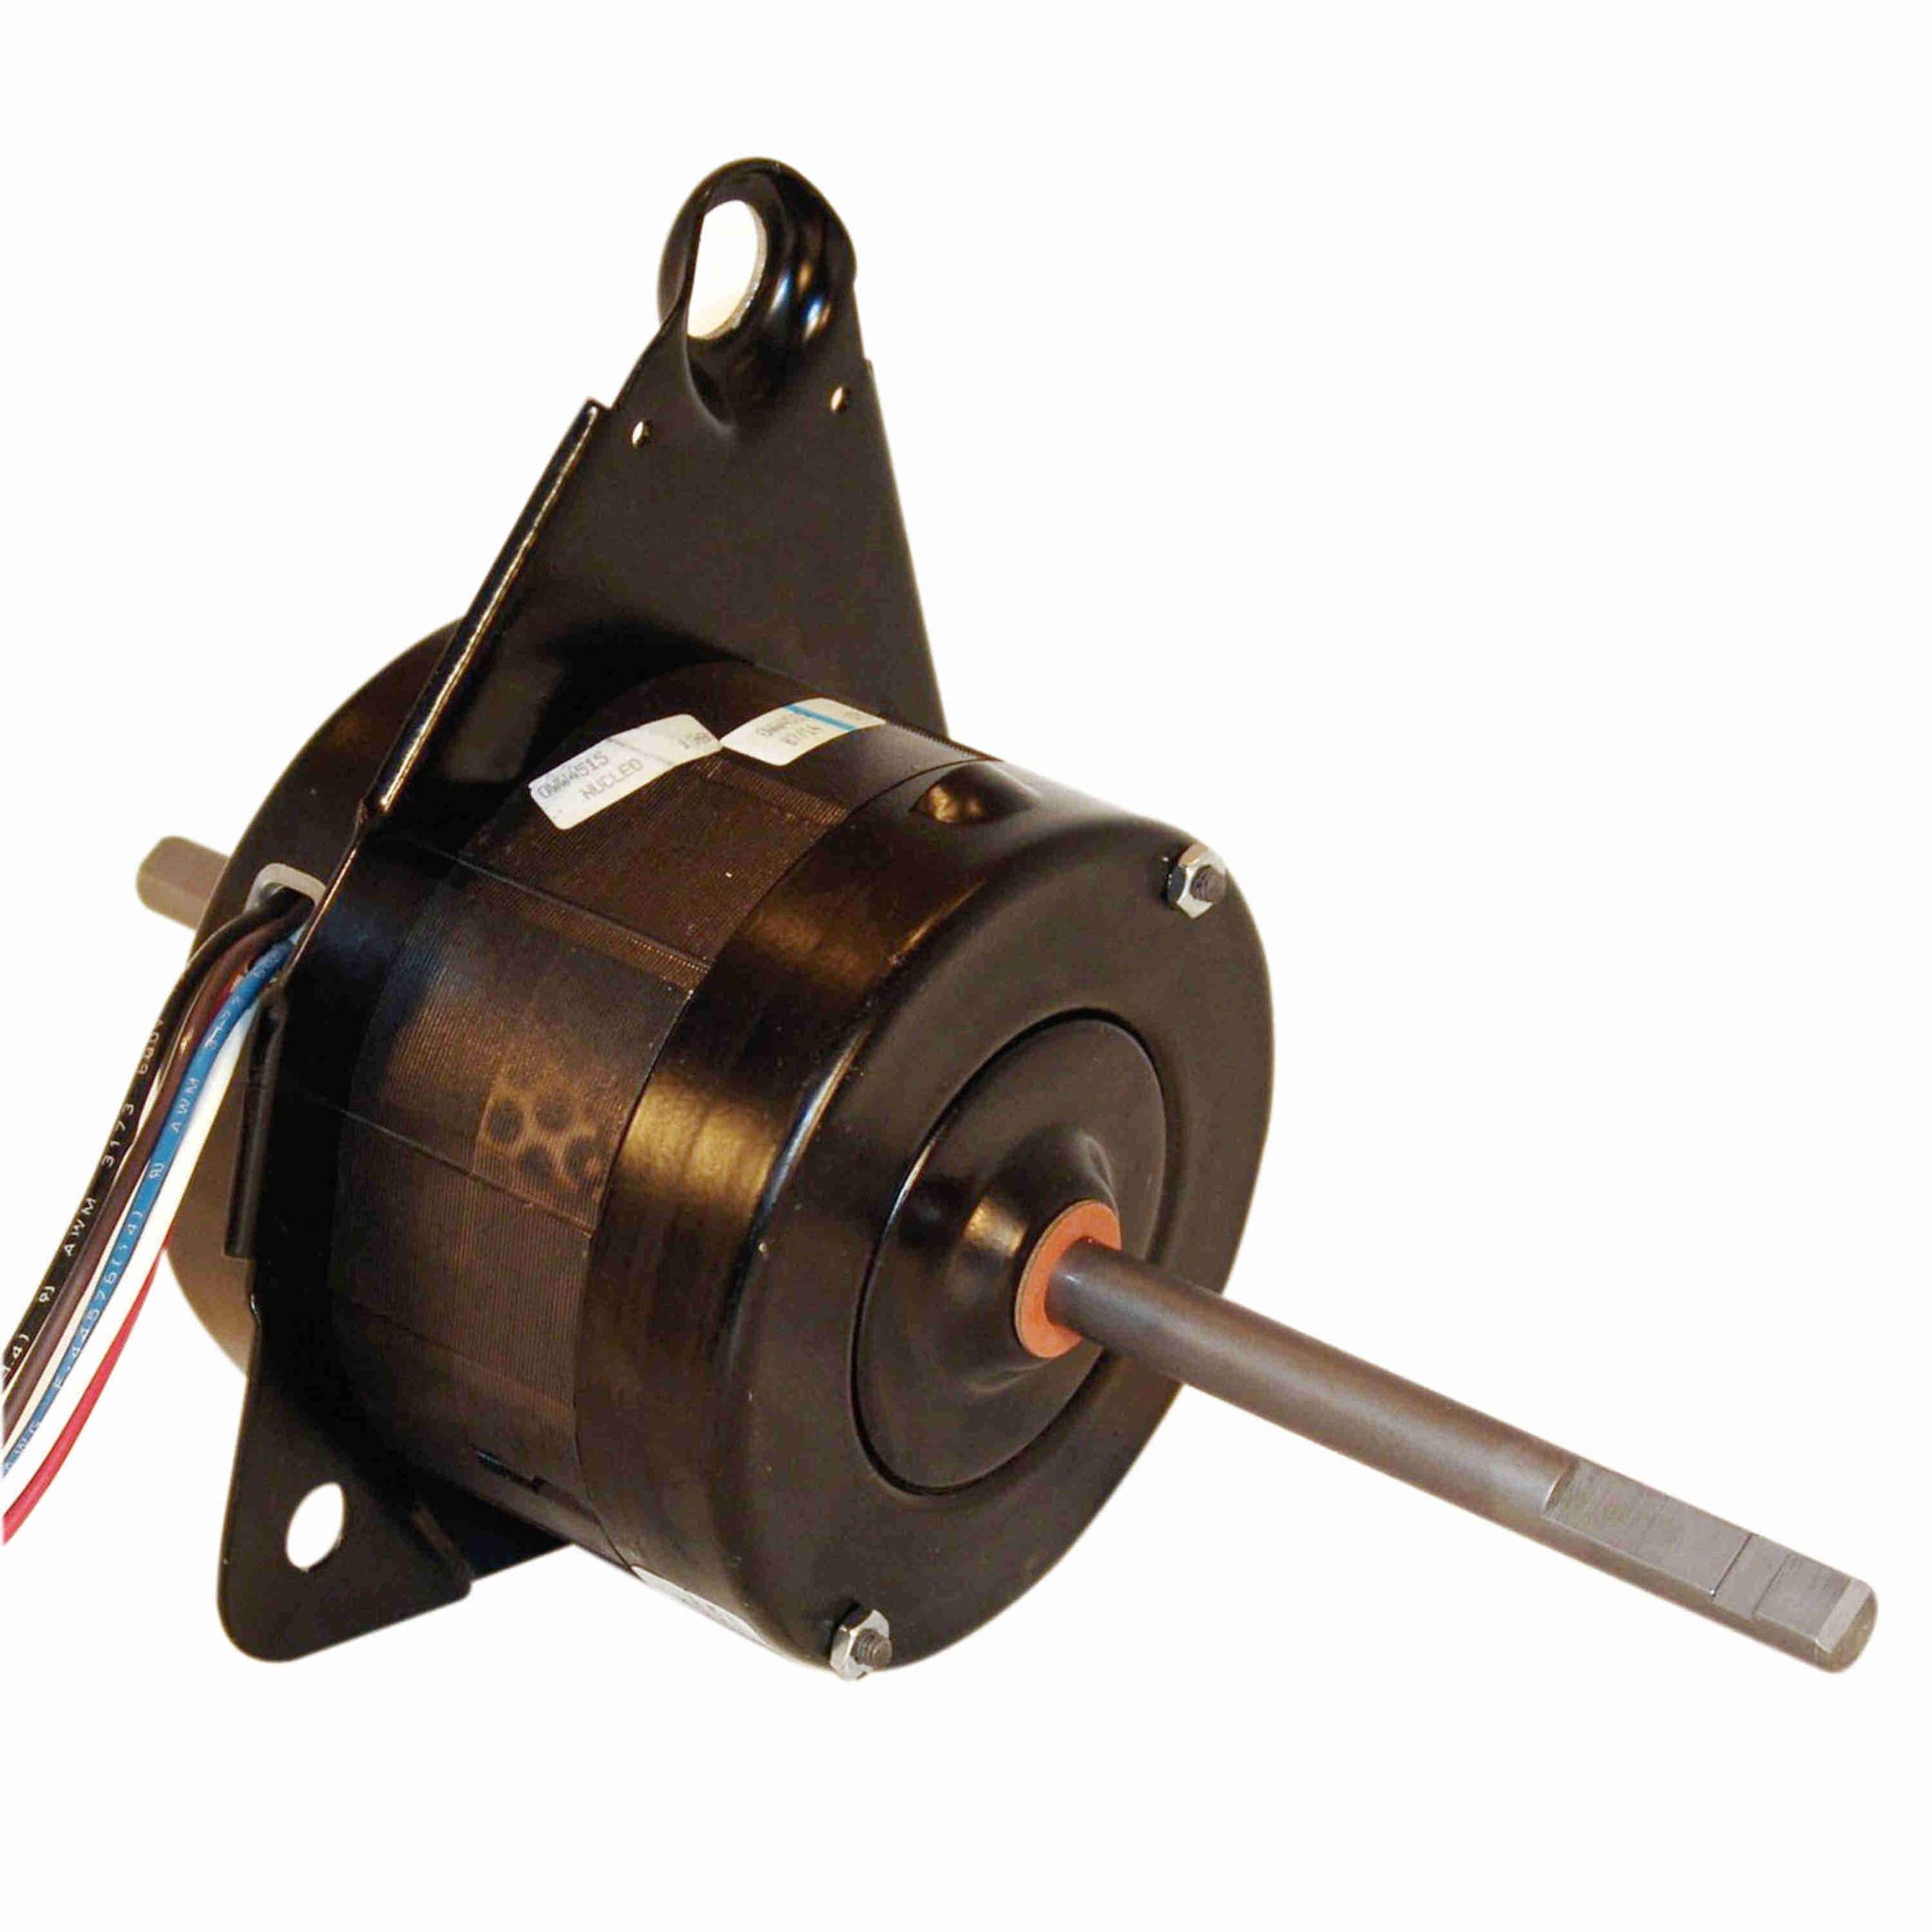 OWW4514 - 1/4 HP OEM Replacement Motor, 1330/1200 RPM, 2 Speed, 208-230 Volts, 42 Frame, TEAO - Hardware & Moreee